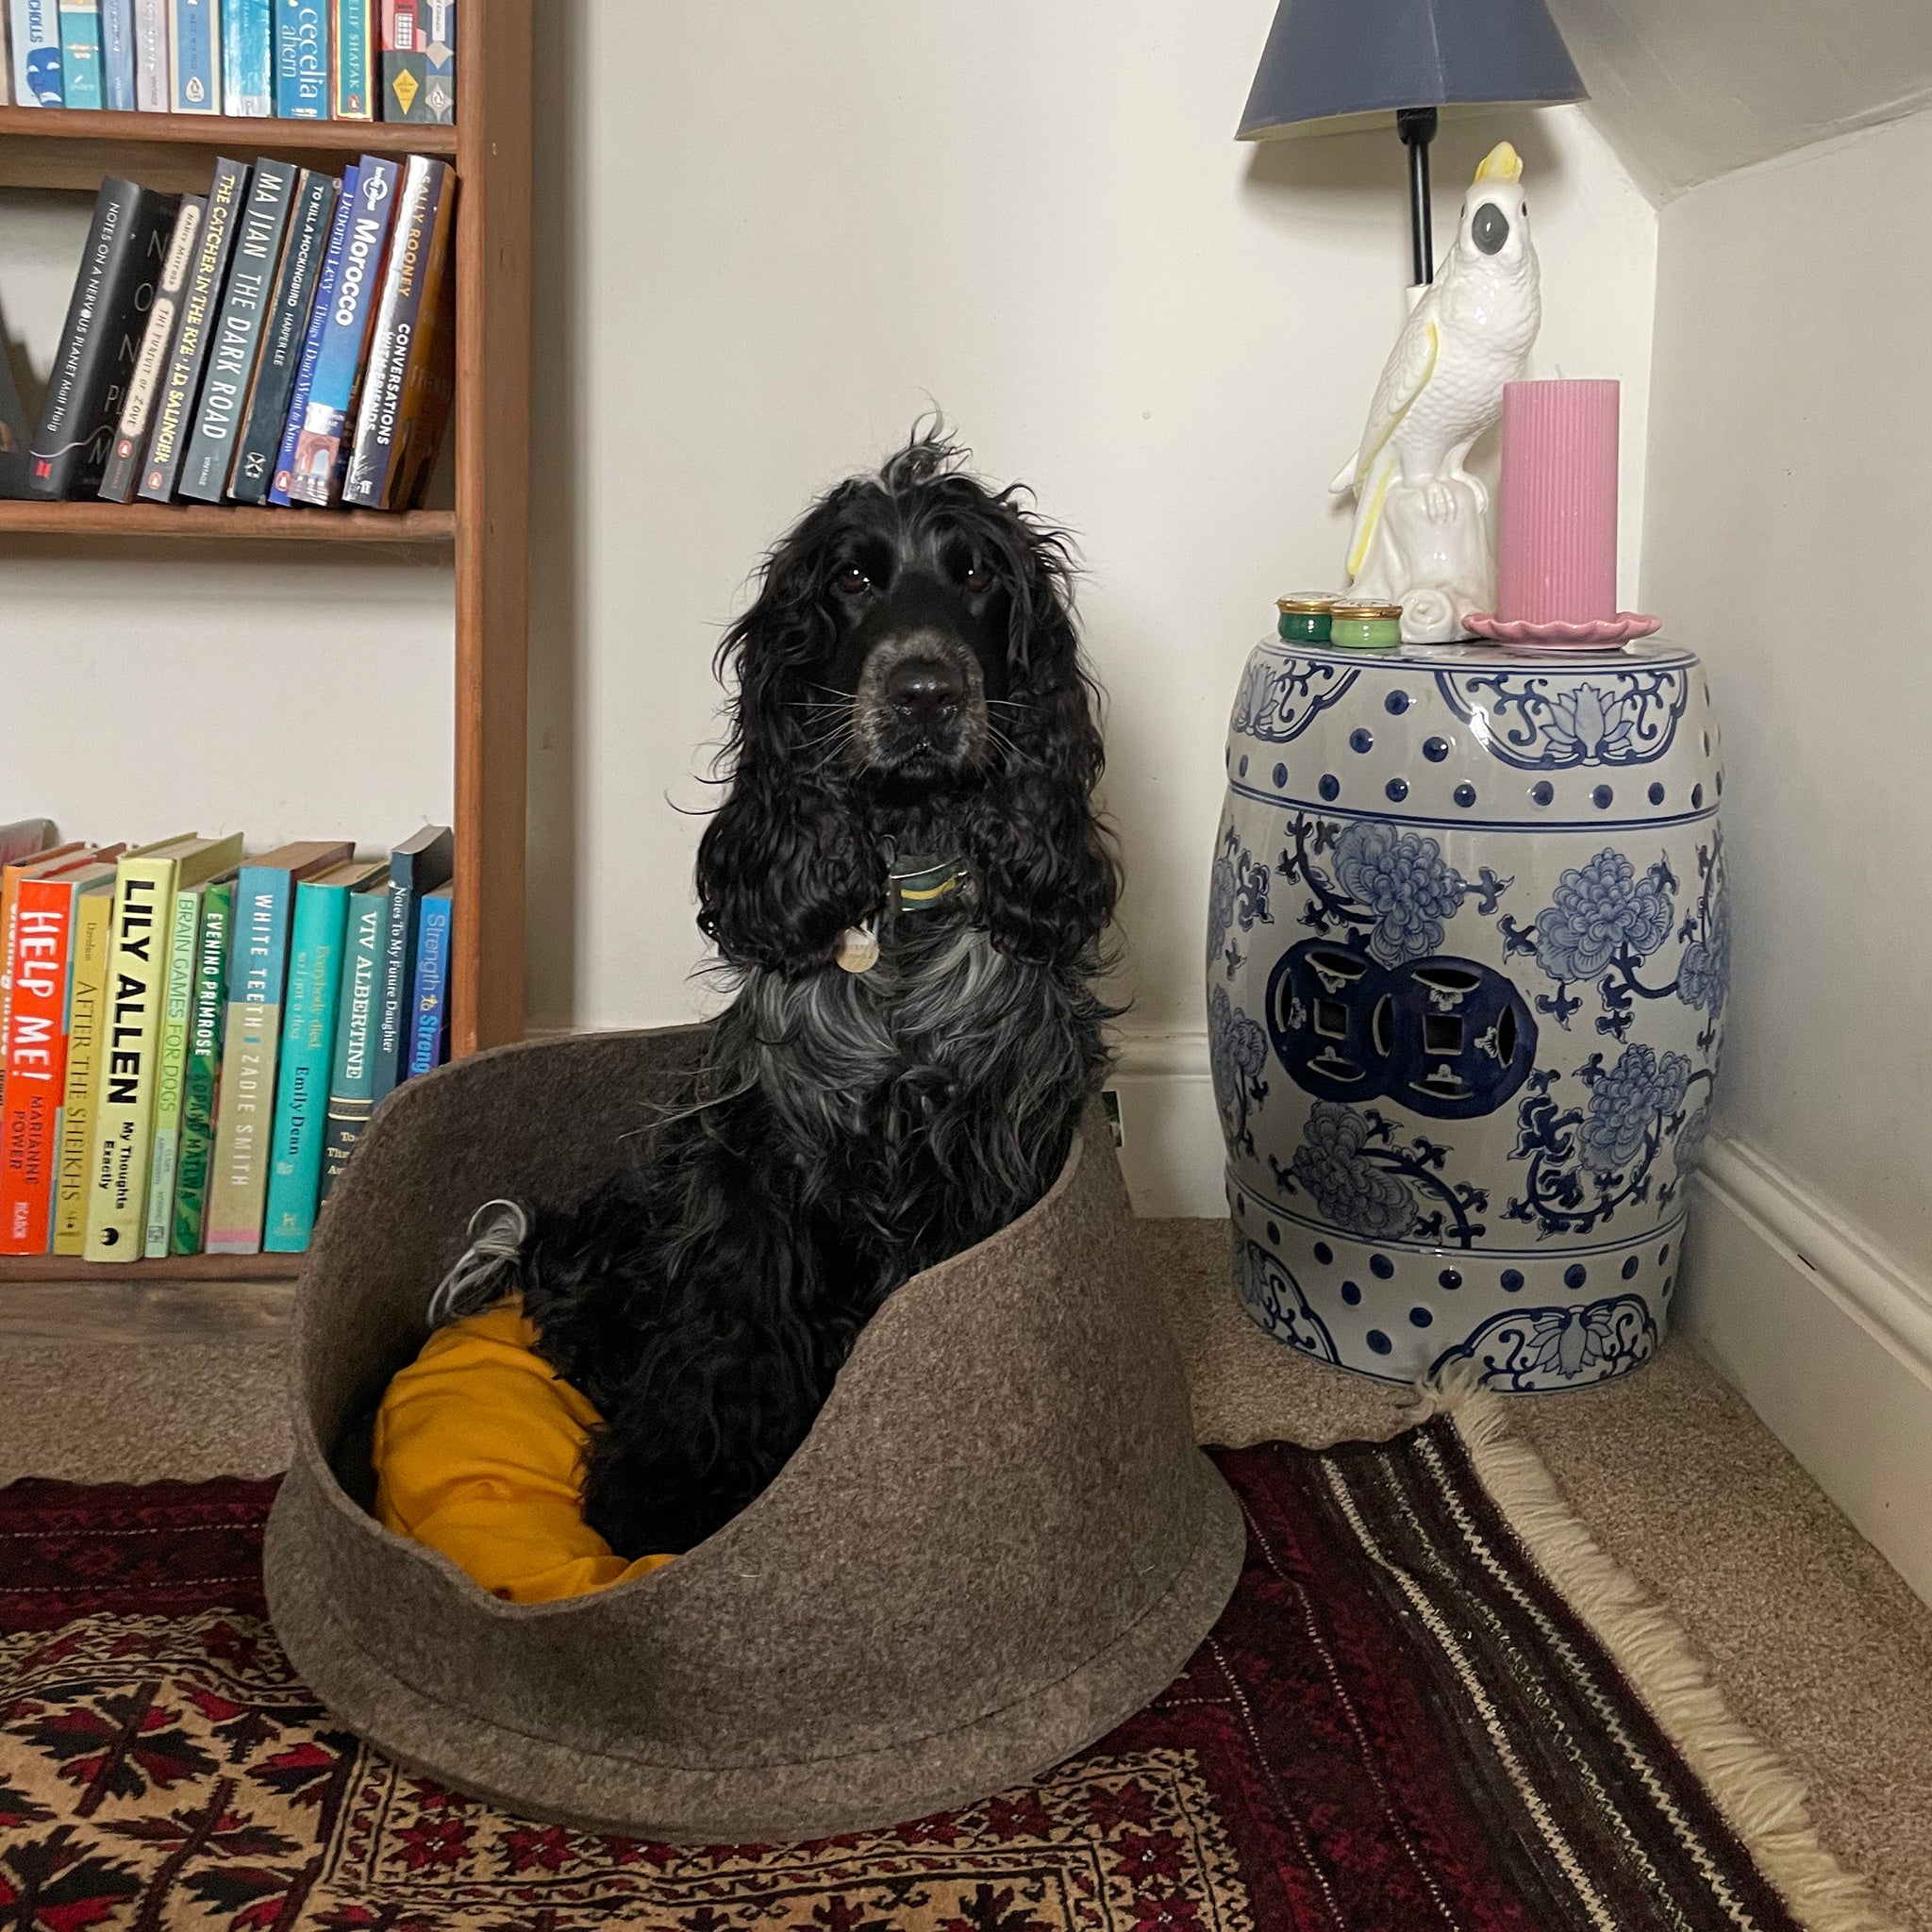 A black and blue merle cocker spaniel sits inside a Chimney Sheep Petsnug wool felt dog bed. The bed is placed next to a stylish lamp and table and is upon a patterned wool rug